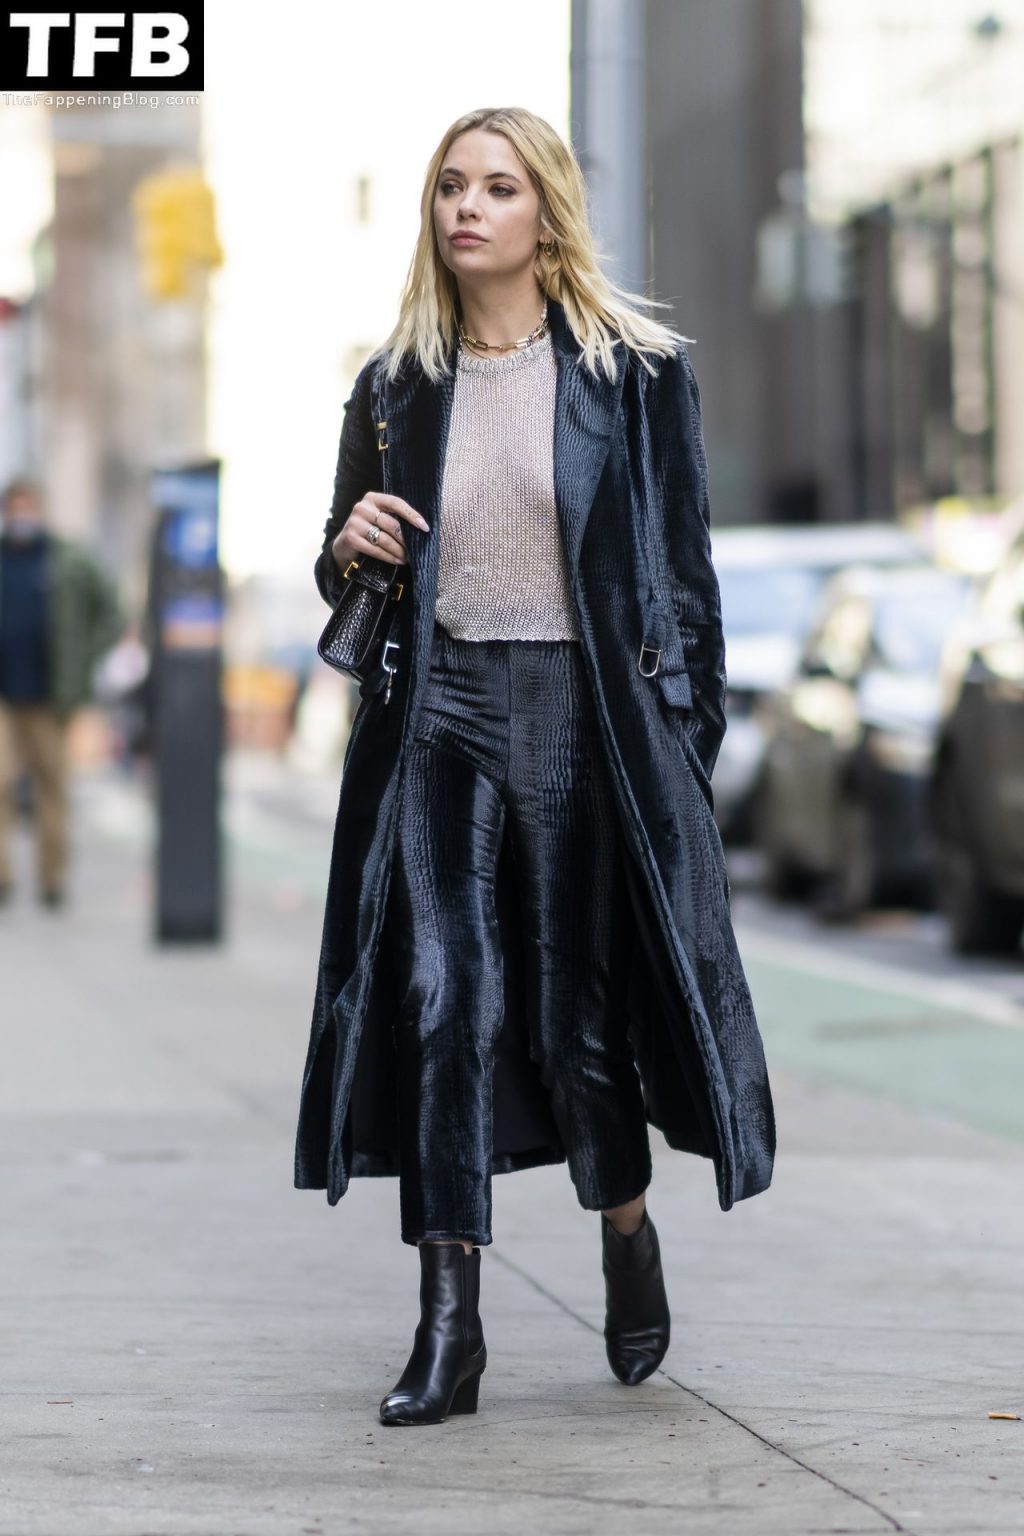 Braless Ashley Benson Looks Stylish While Heading to a Meeting in NYC (20 Photos)